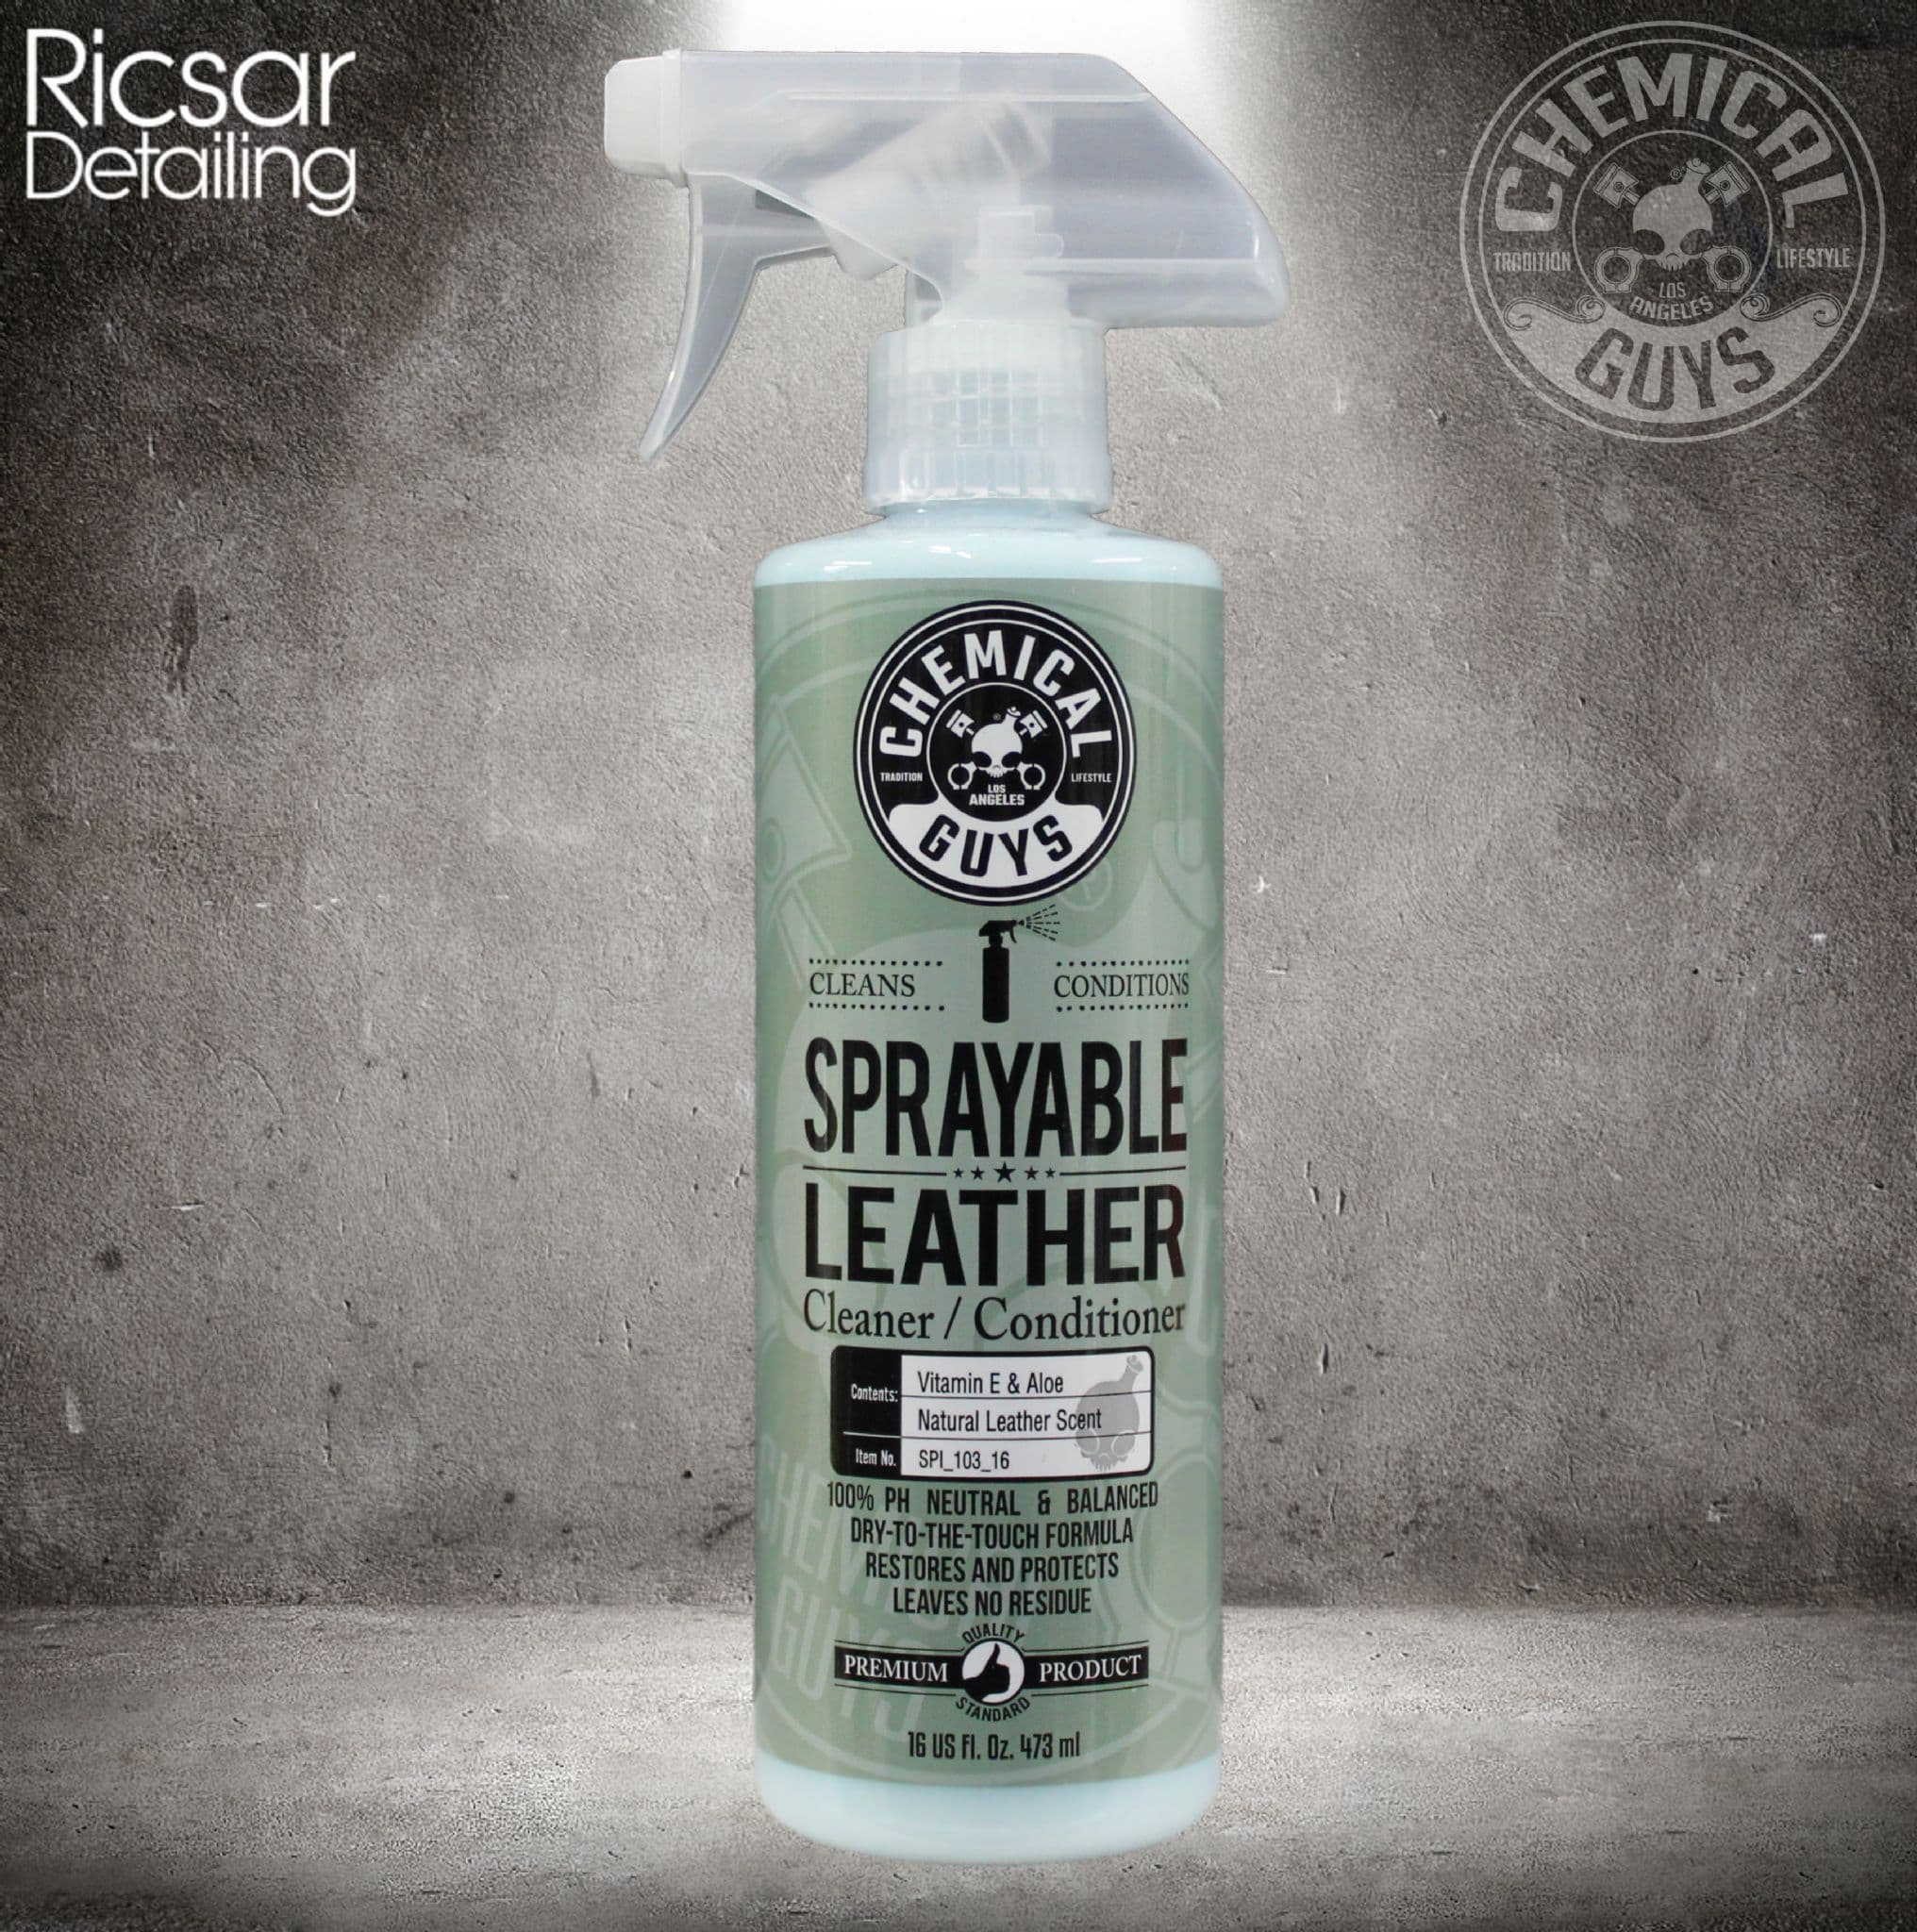 Ceramic Garage Leather Revive Leather Cleaner for Car Interior | Leather Conditioner | Leather Seat Cleaner and Conditioner (16oz)